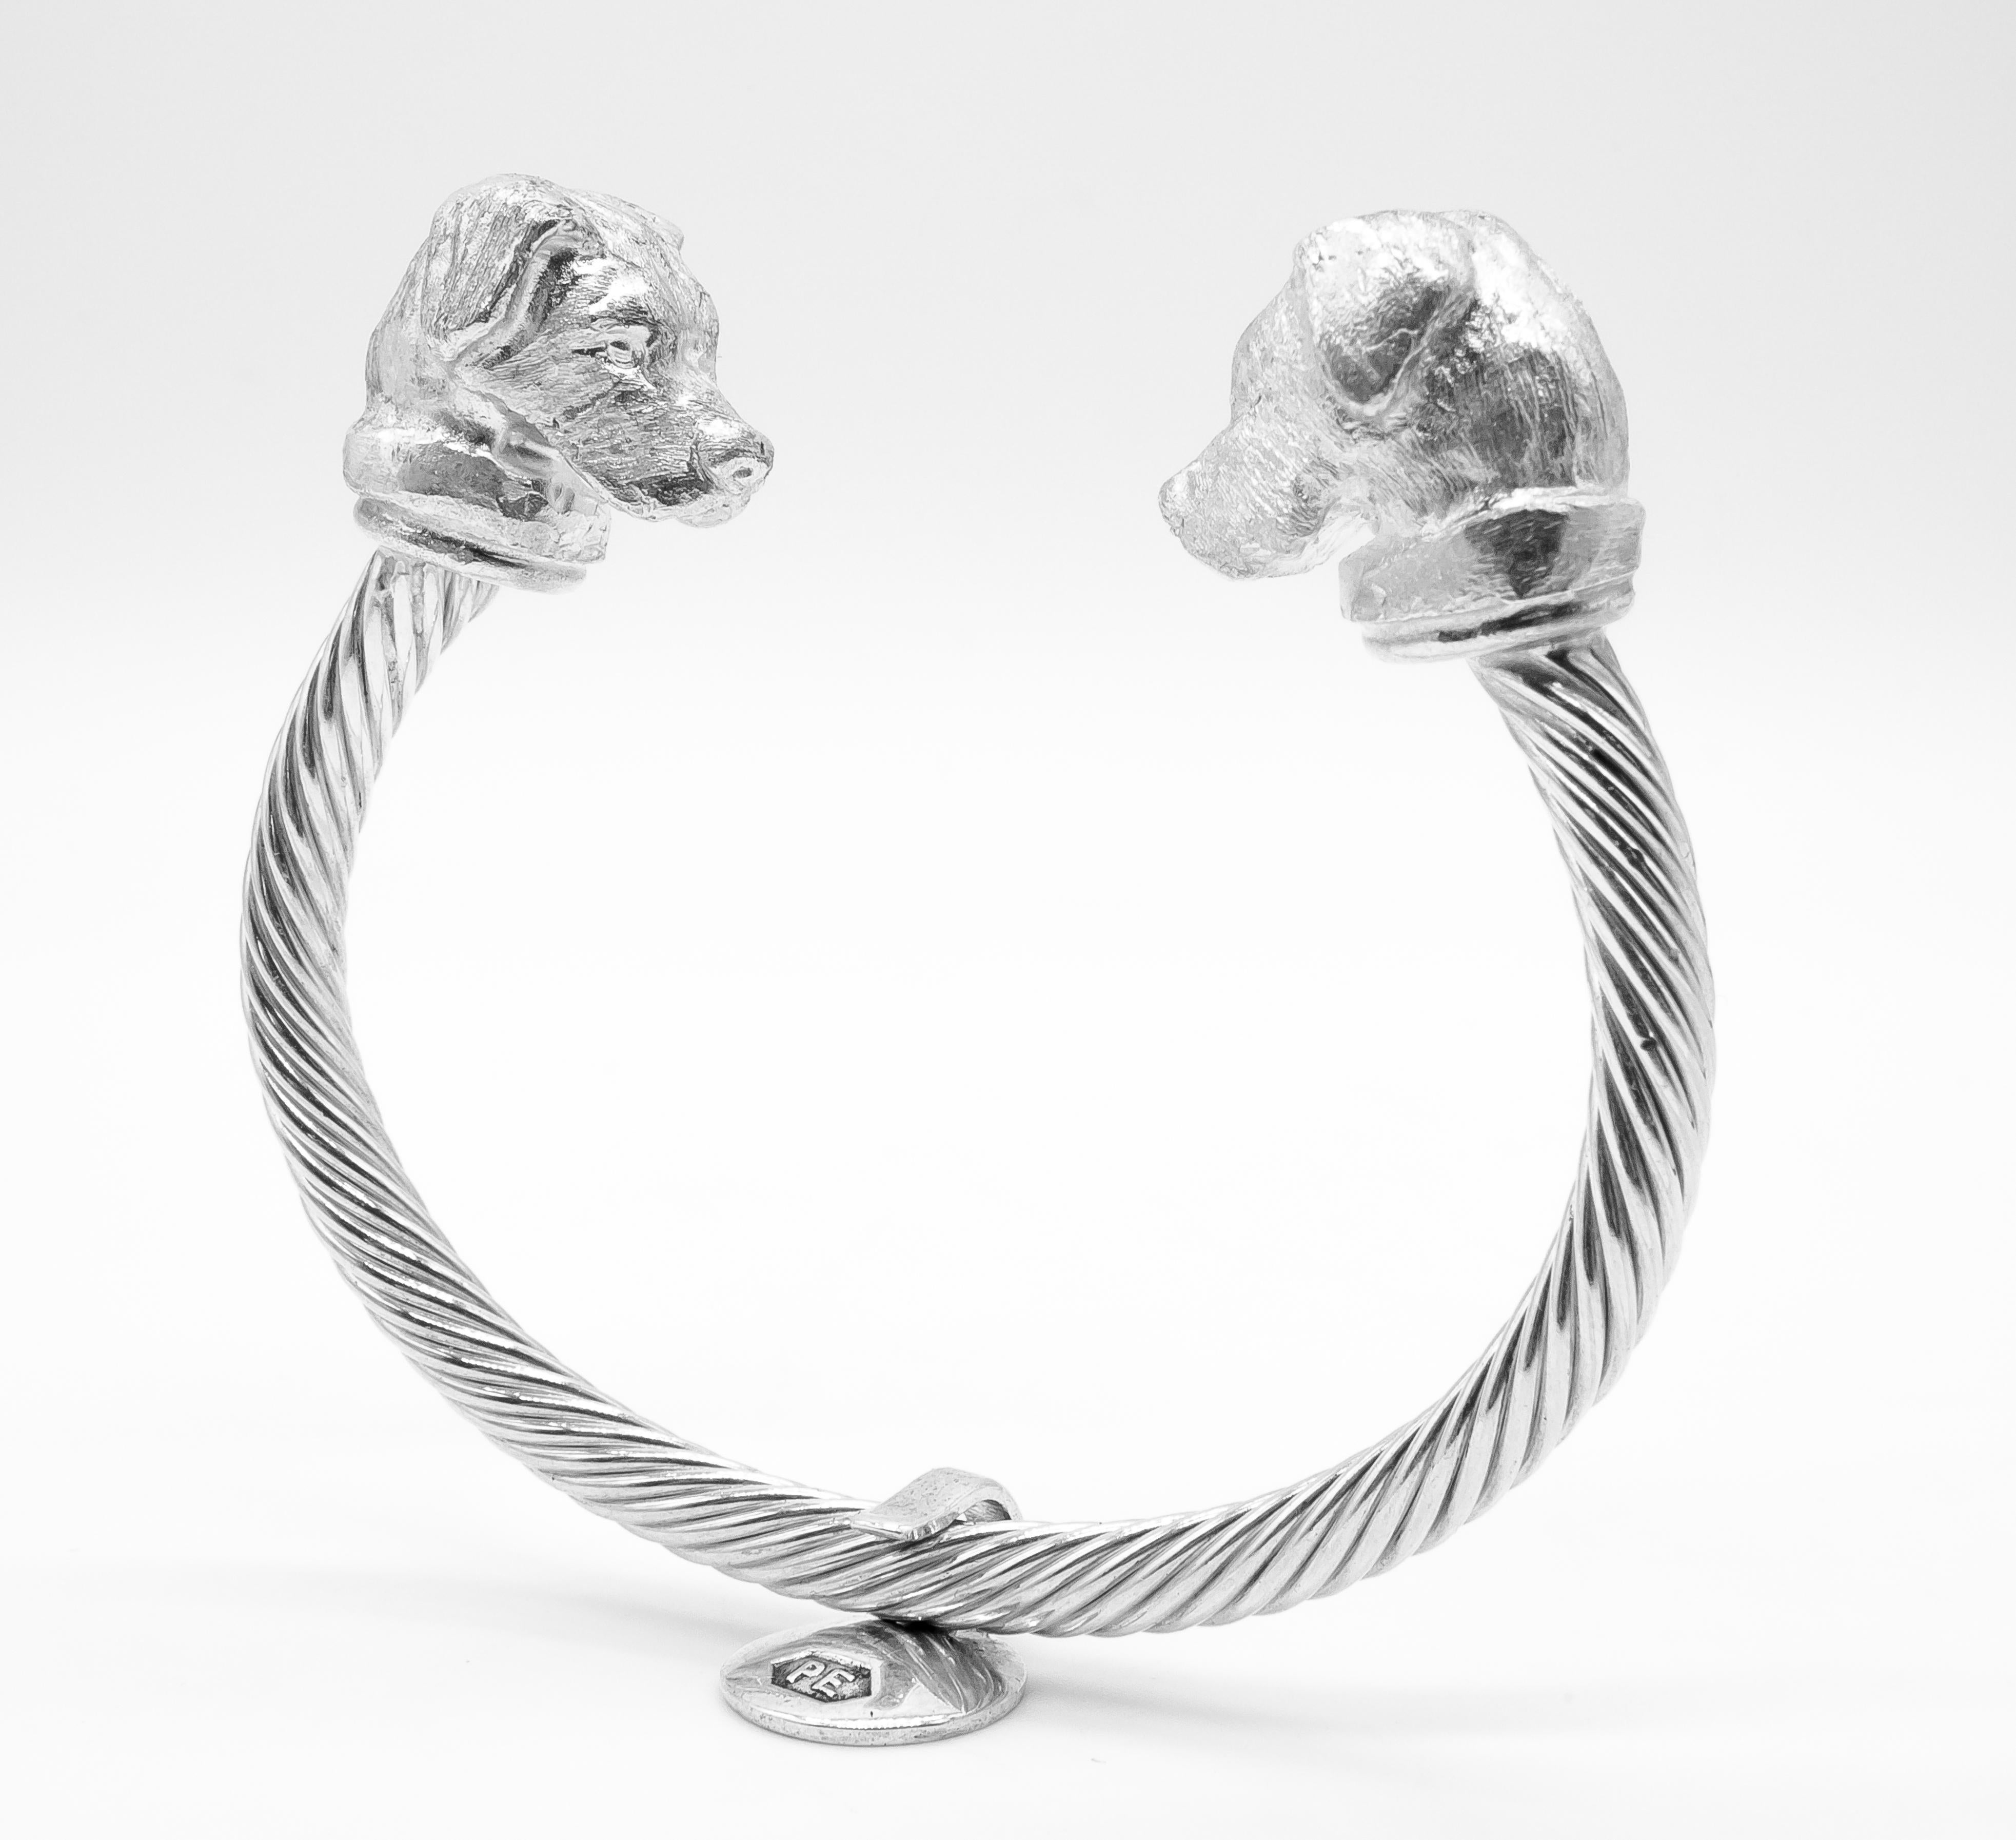 British wildlife sculptor PAUL EATON's bespoke hand-carved dog miniature sculptures of Mastiff or Family Crest Dog Heads on a sterling silver twisted bangle are beautiful works of art. Paul Eaton’s bespoke dog bangles are made by hand and this